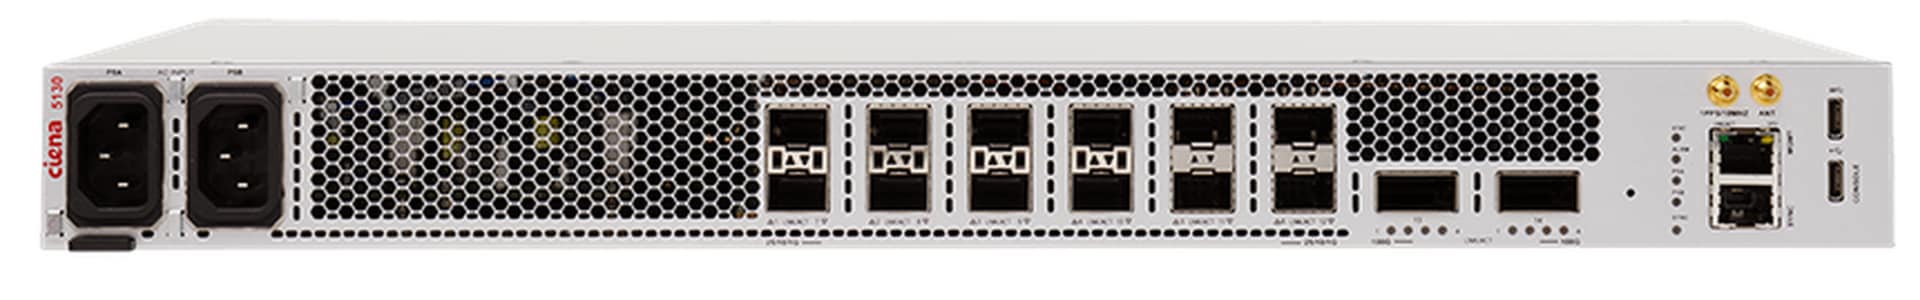 Ciena 5130 12x1/10/25GbE and 2x100GbE Router